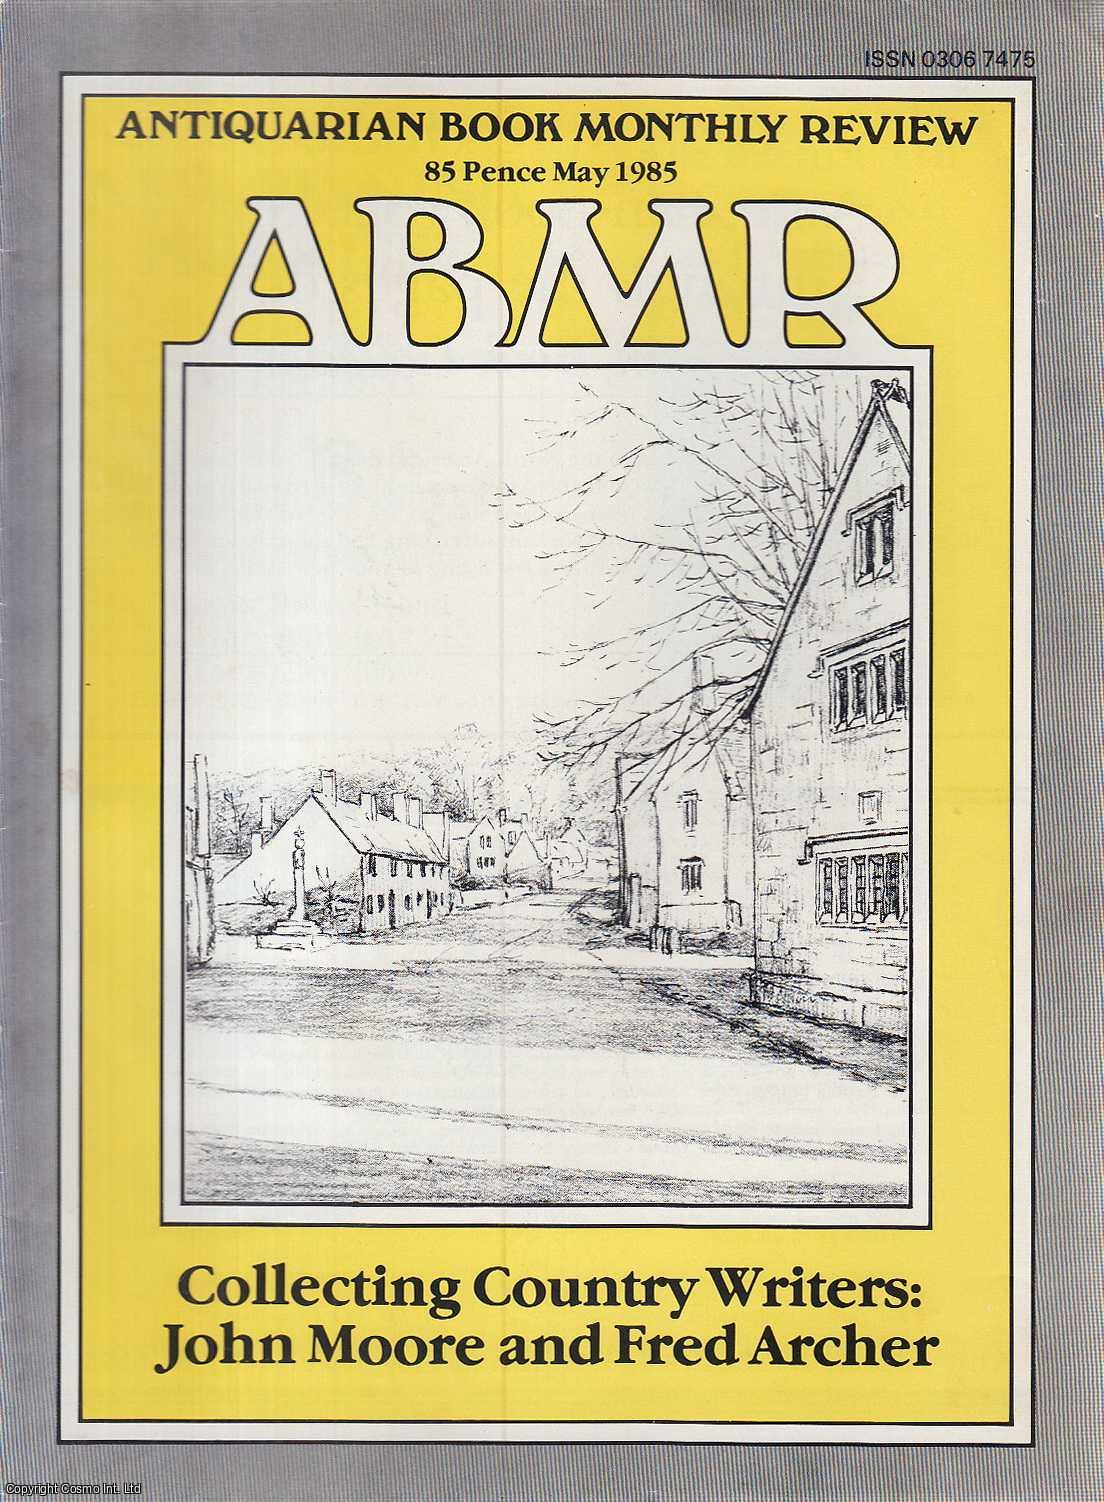 ABMR - Antiquarian Book Monthly Review, May 1985. An original complete monthly issue of the Antiquarian Book Monthly Review, 1985.